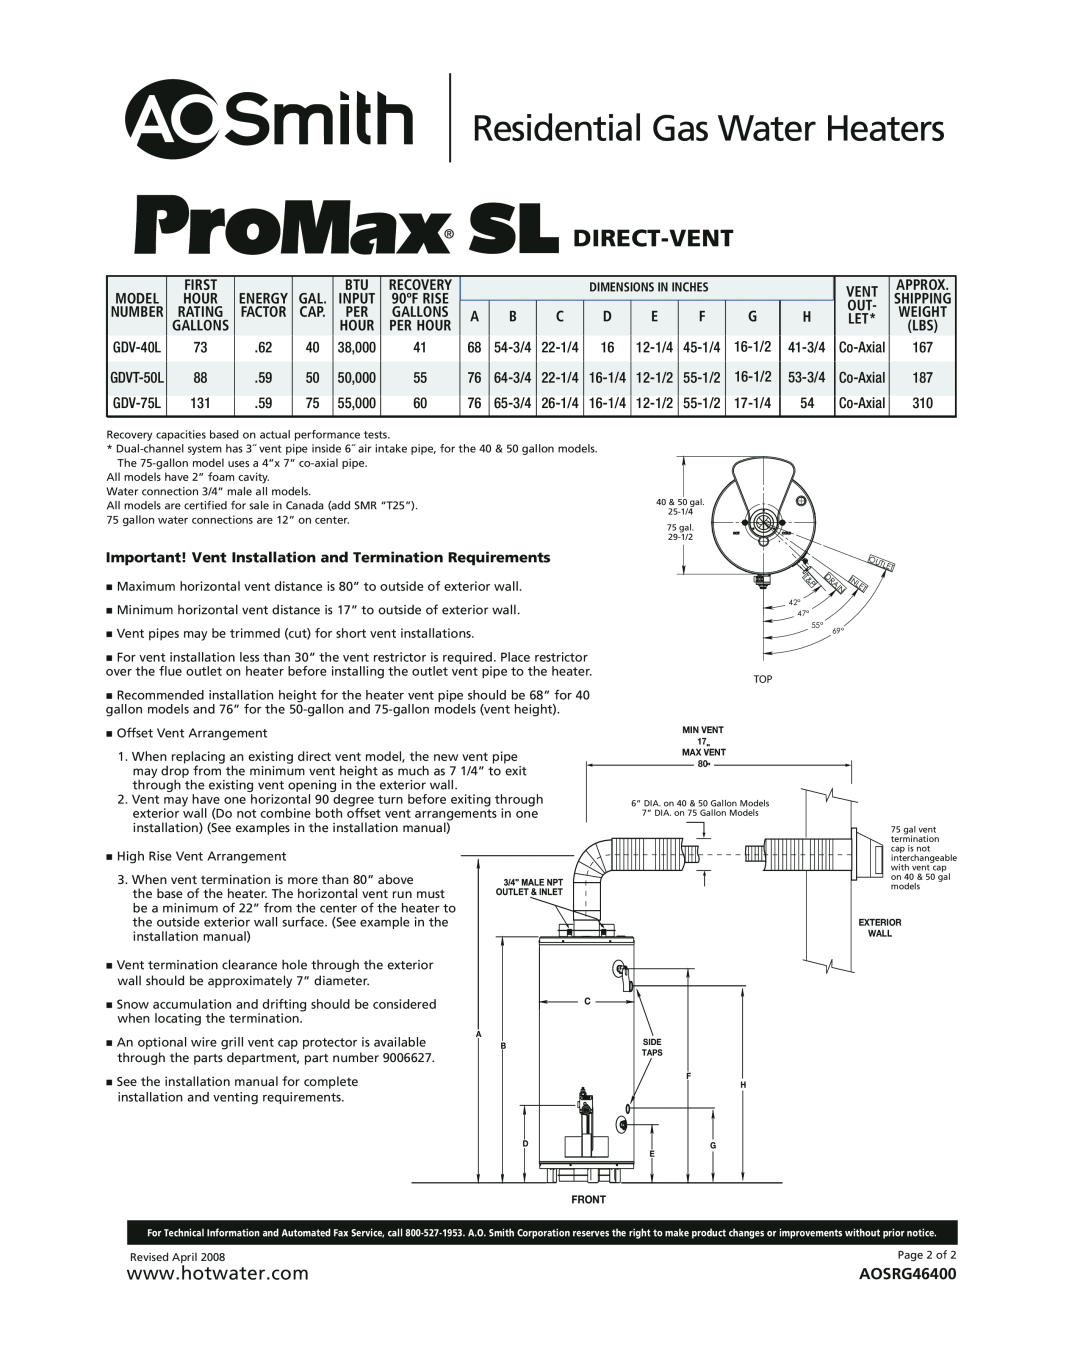 Univex ProMax SL Direct-Vent, Residential Gas Water Heaters, AOSRG46400, Dimensions In Inches, Hour, Energy, Input, Number 